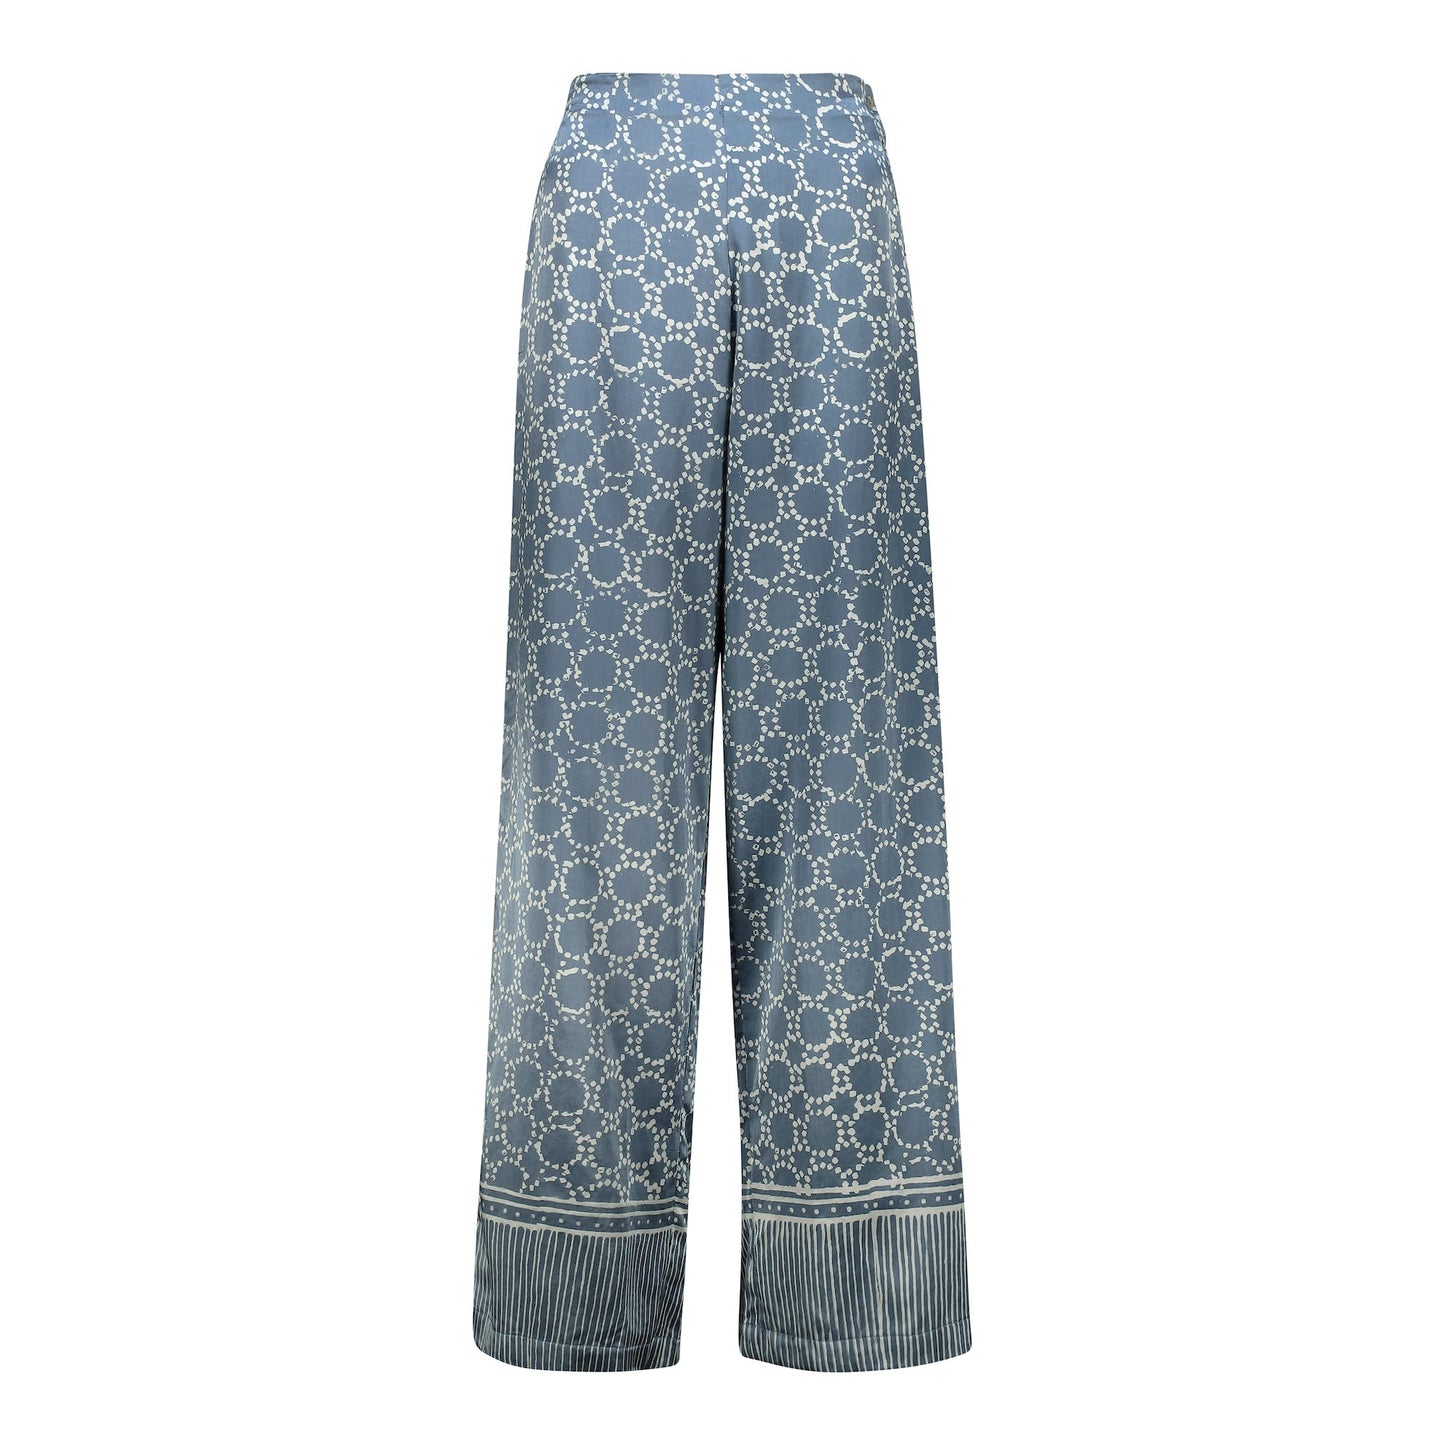 COCO TROUSERS - PITCH BLUE